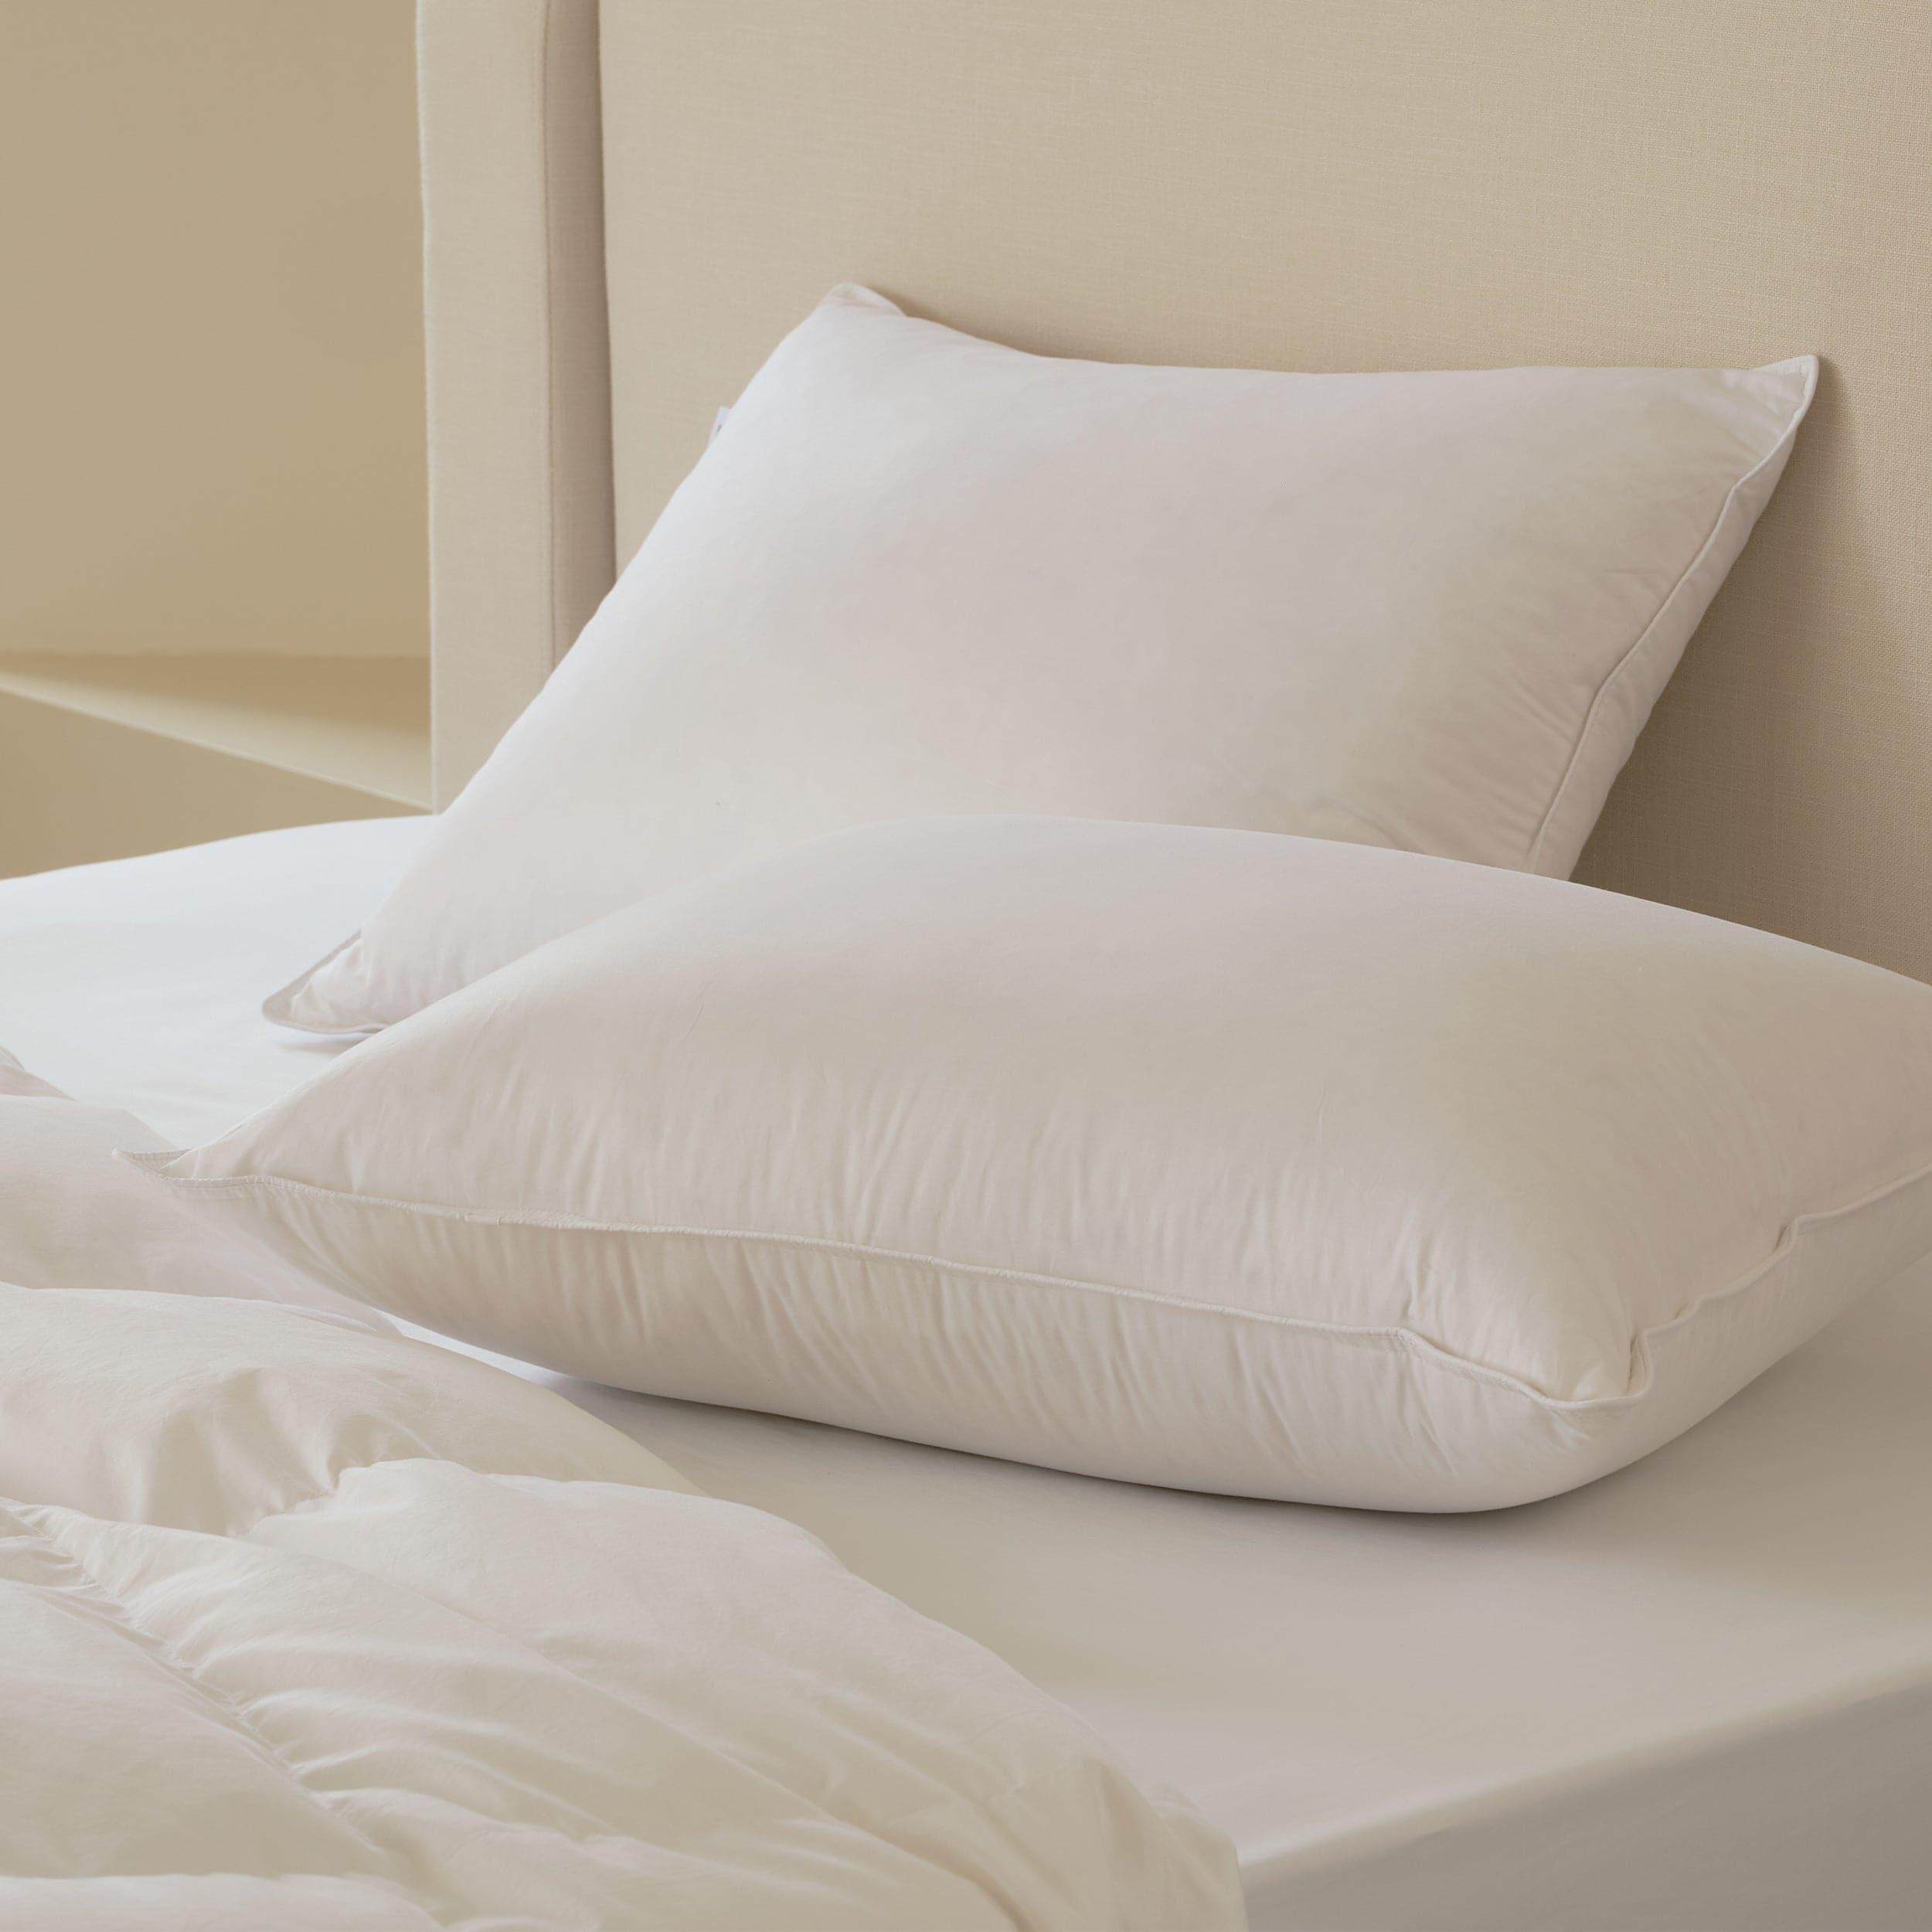 The down pillow is encased in a soft and breathable fabric, enhancing its comfort and durability.